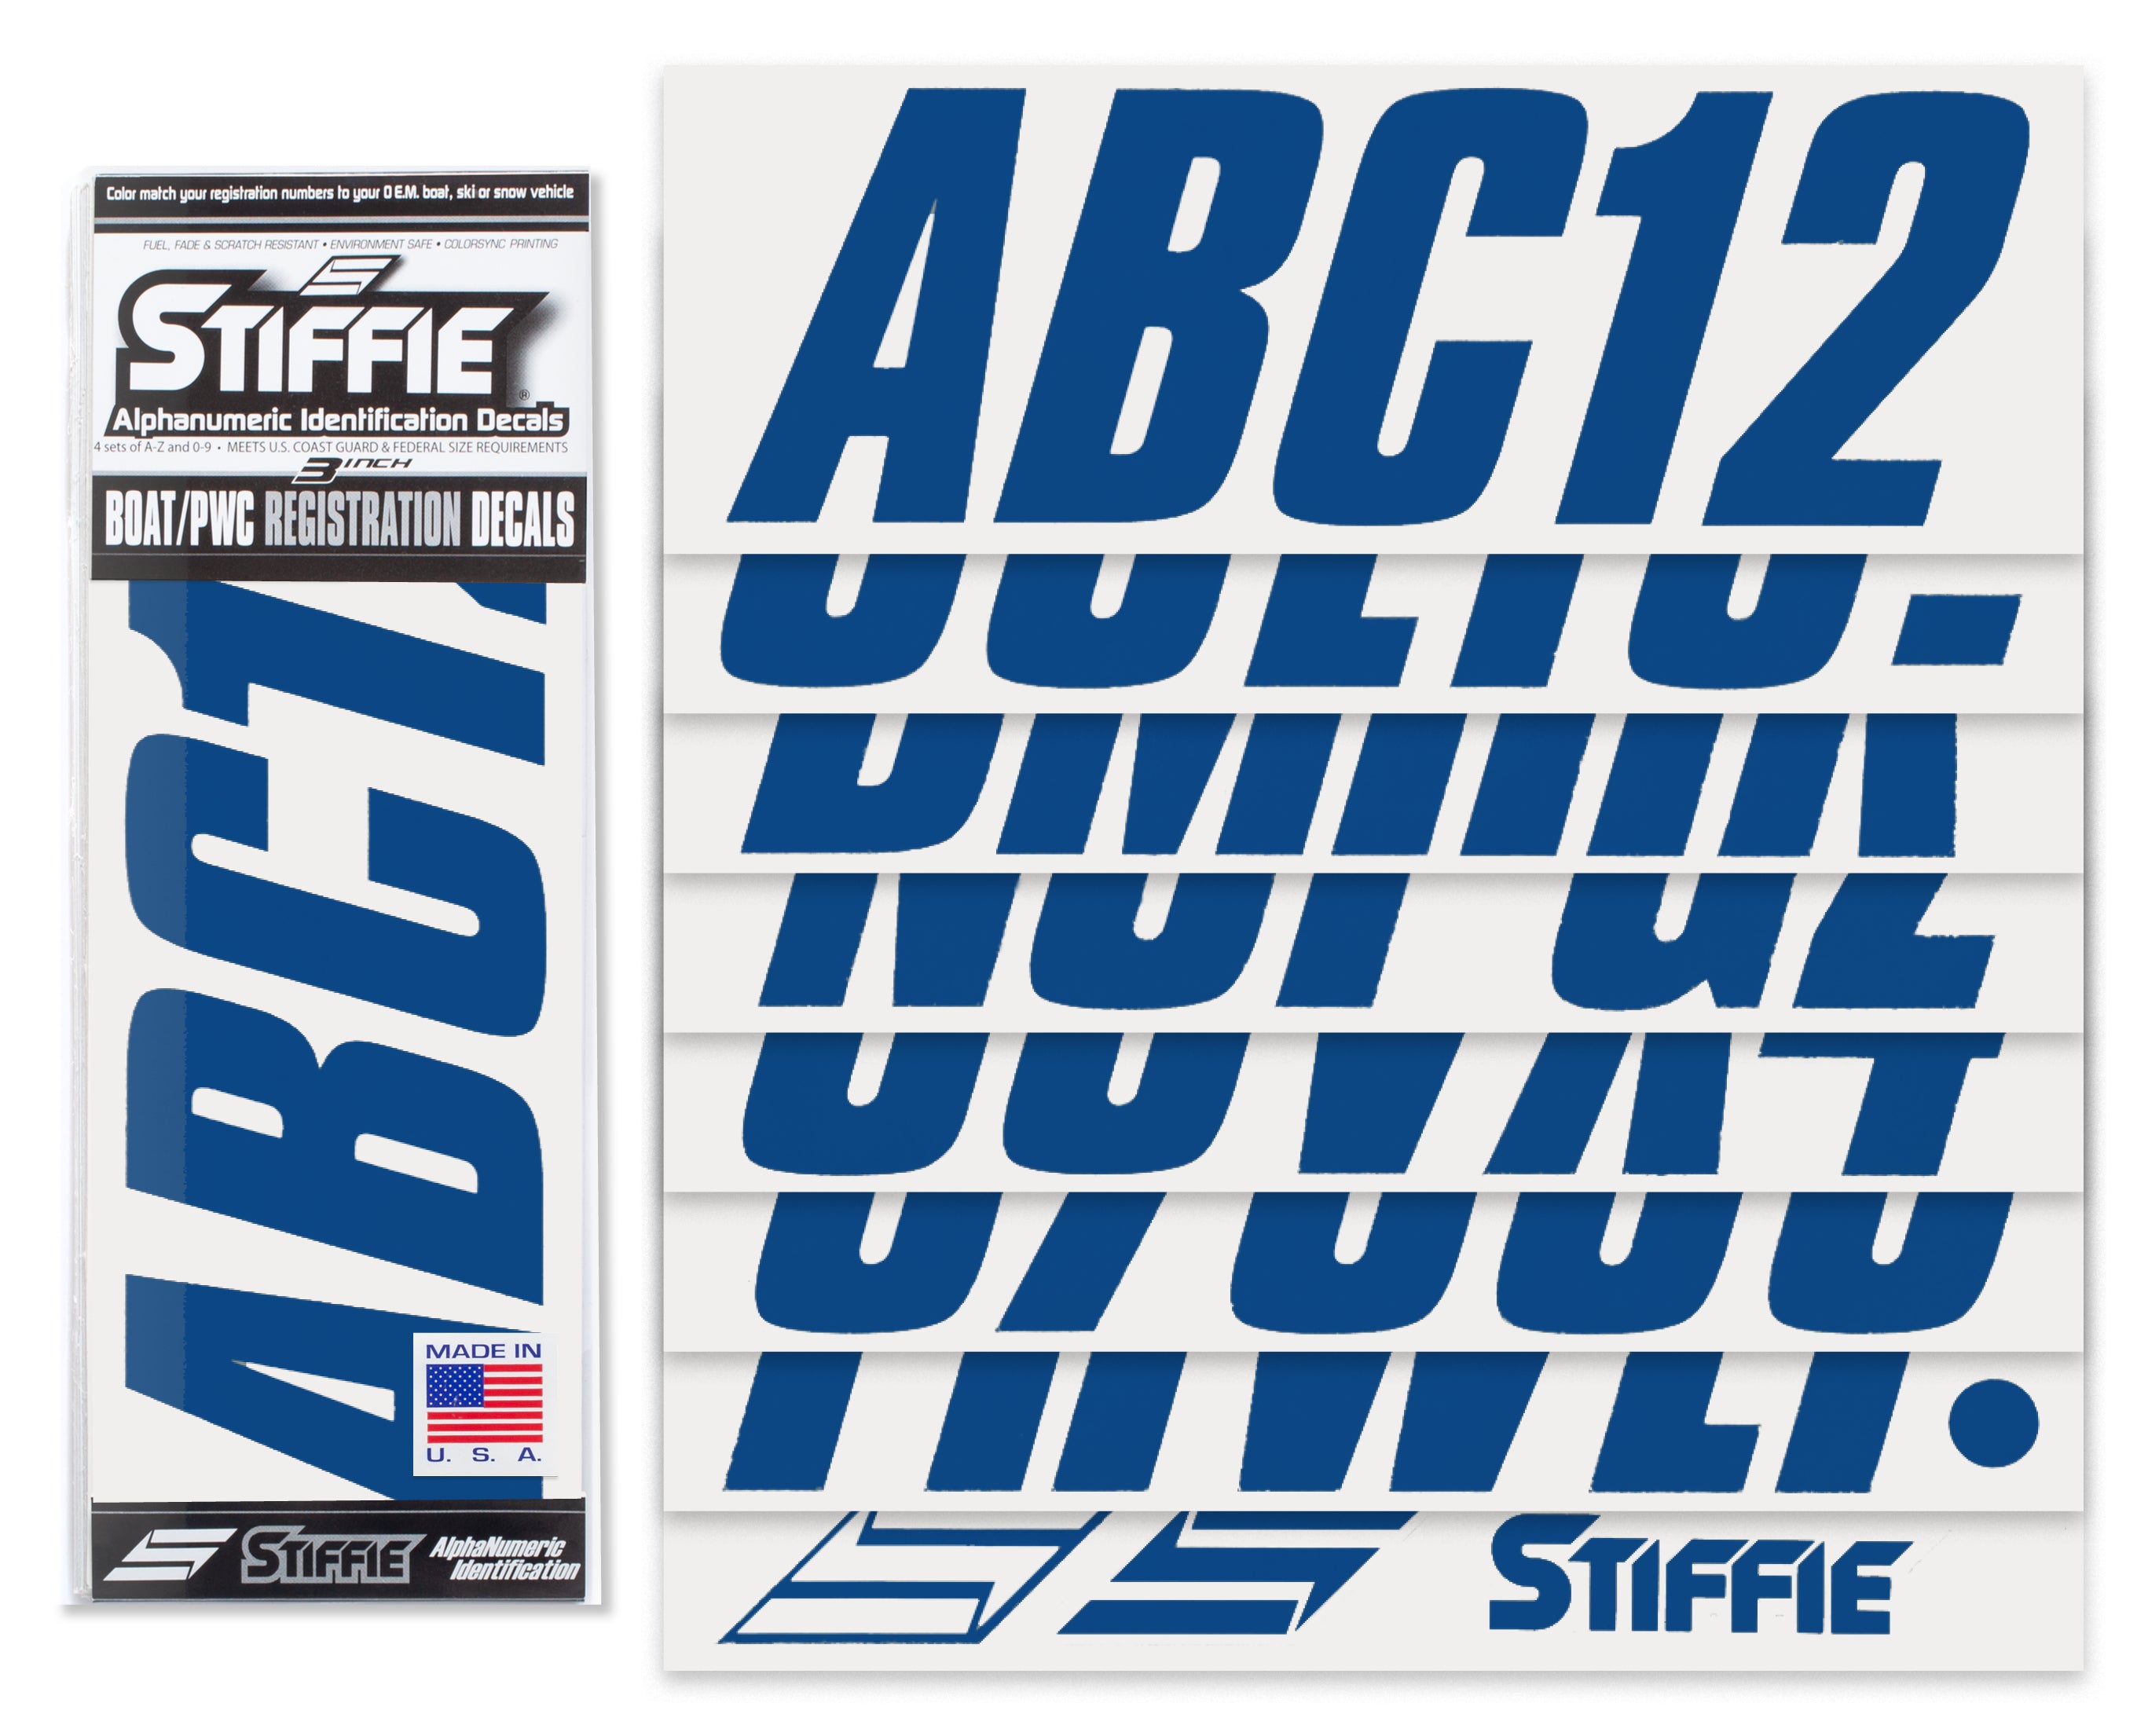 STIFFIE Shift Navy 3" ID Kit Alpha-Numeric Registration Identification Numbers Stickers Decals for Boats & Personal Watercraft